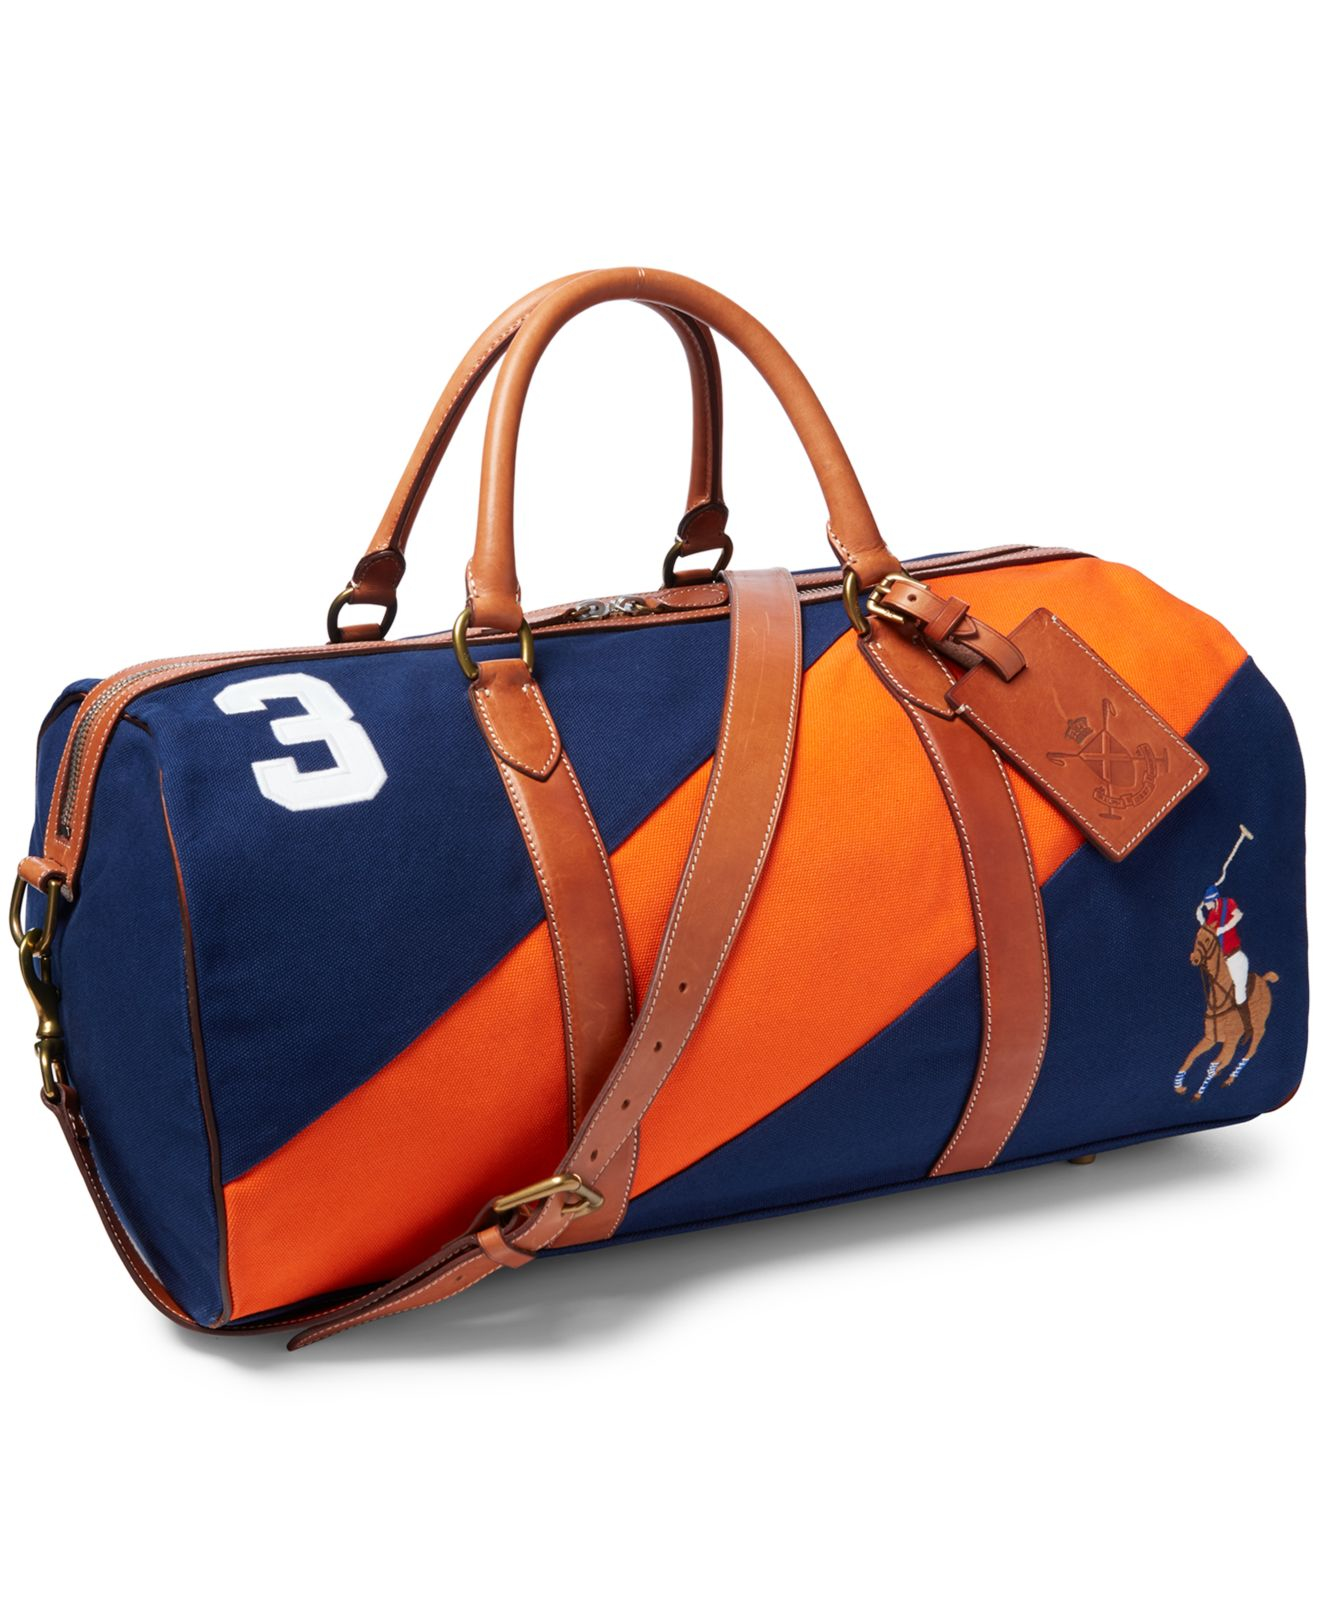 Mens Bags Gym bags and sports bags Polo Ralph Lauren Leather Duffel Bag for Men 